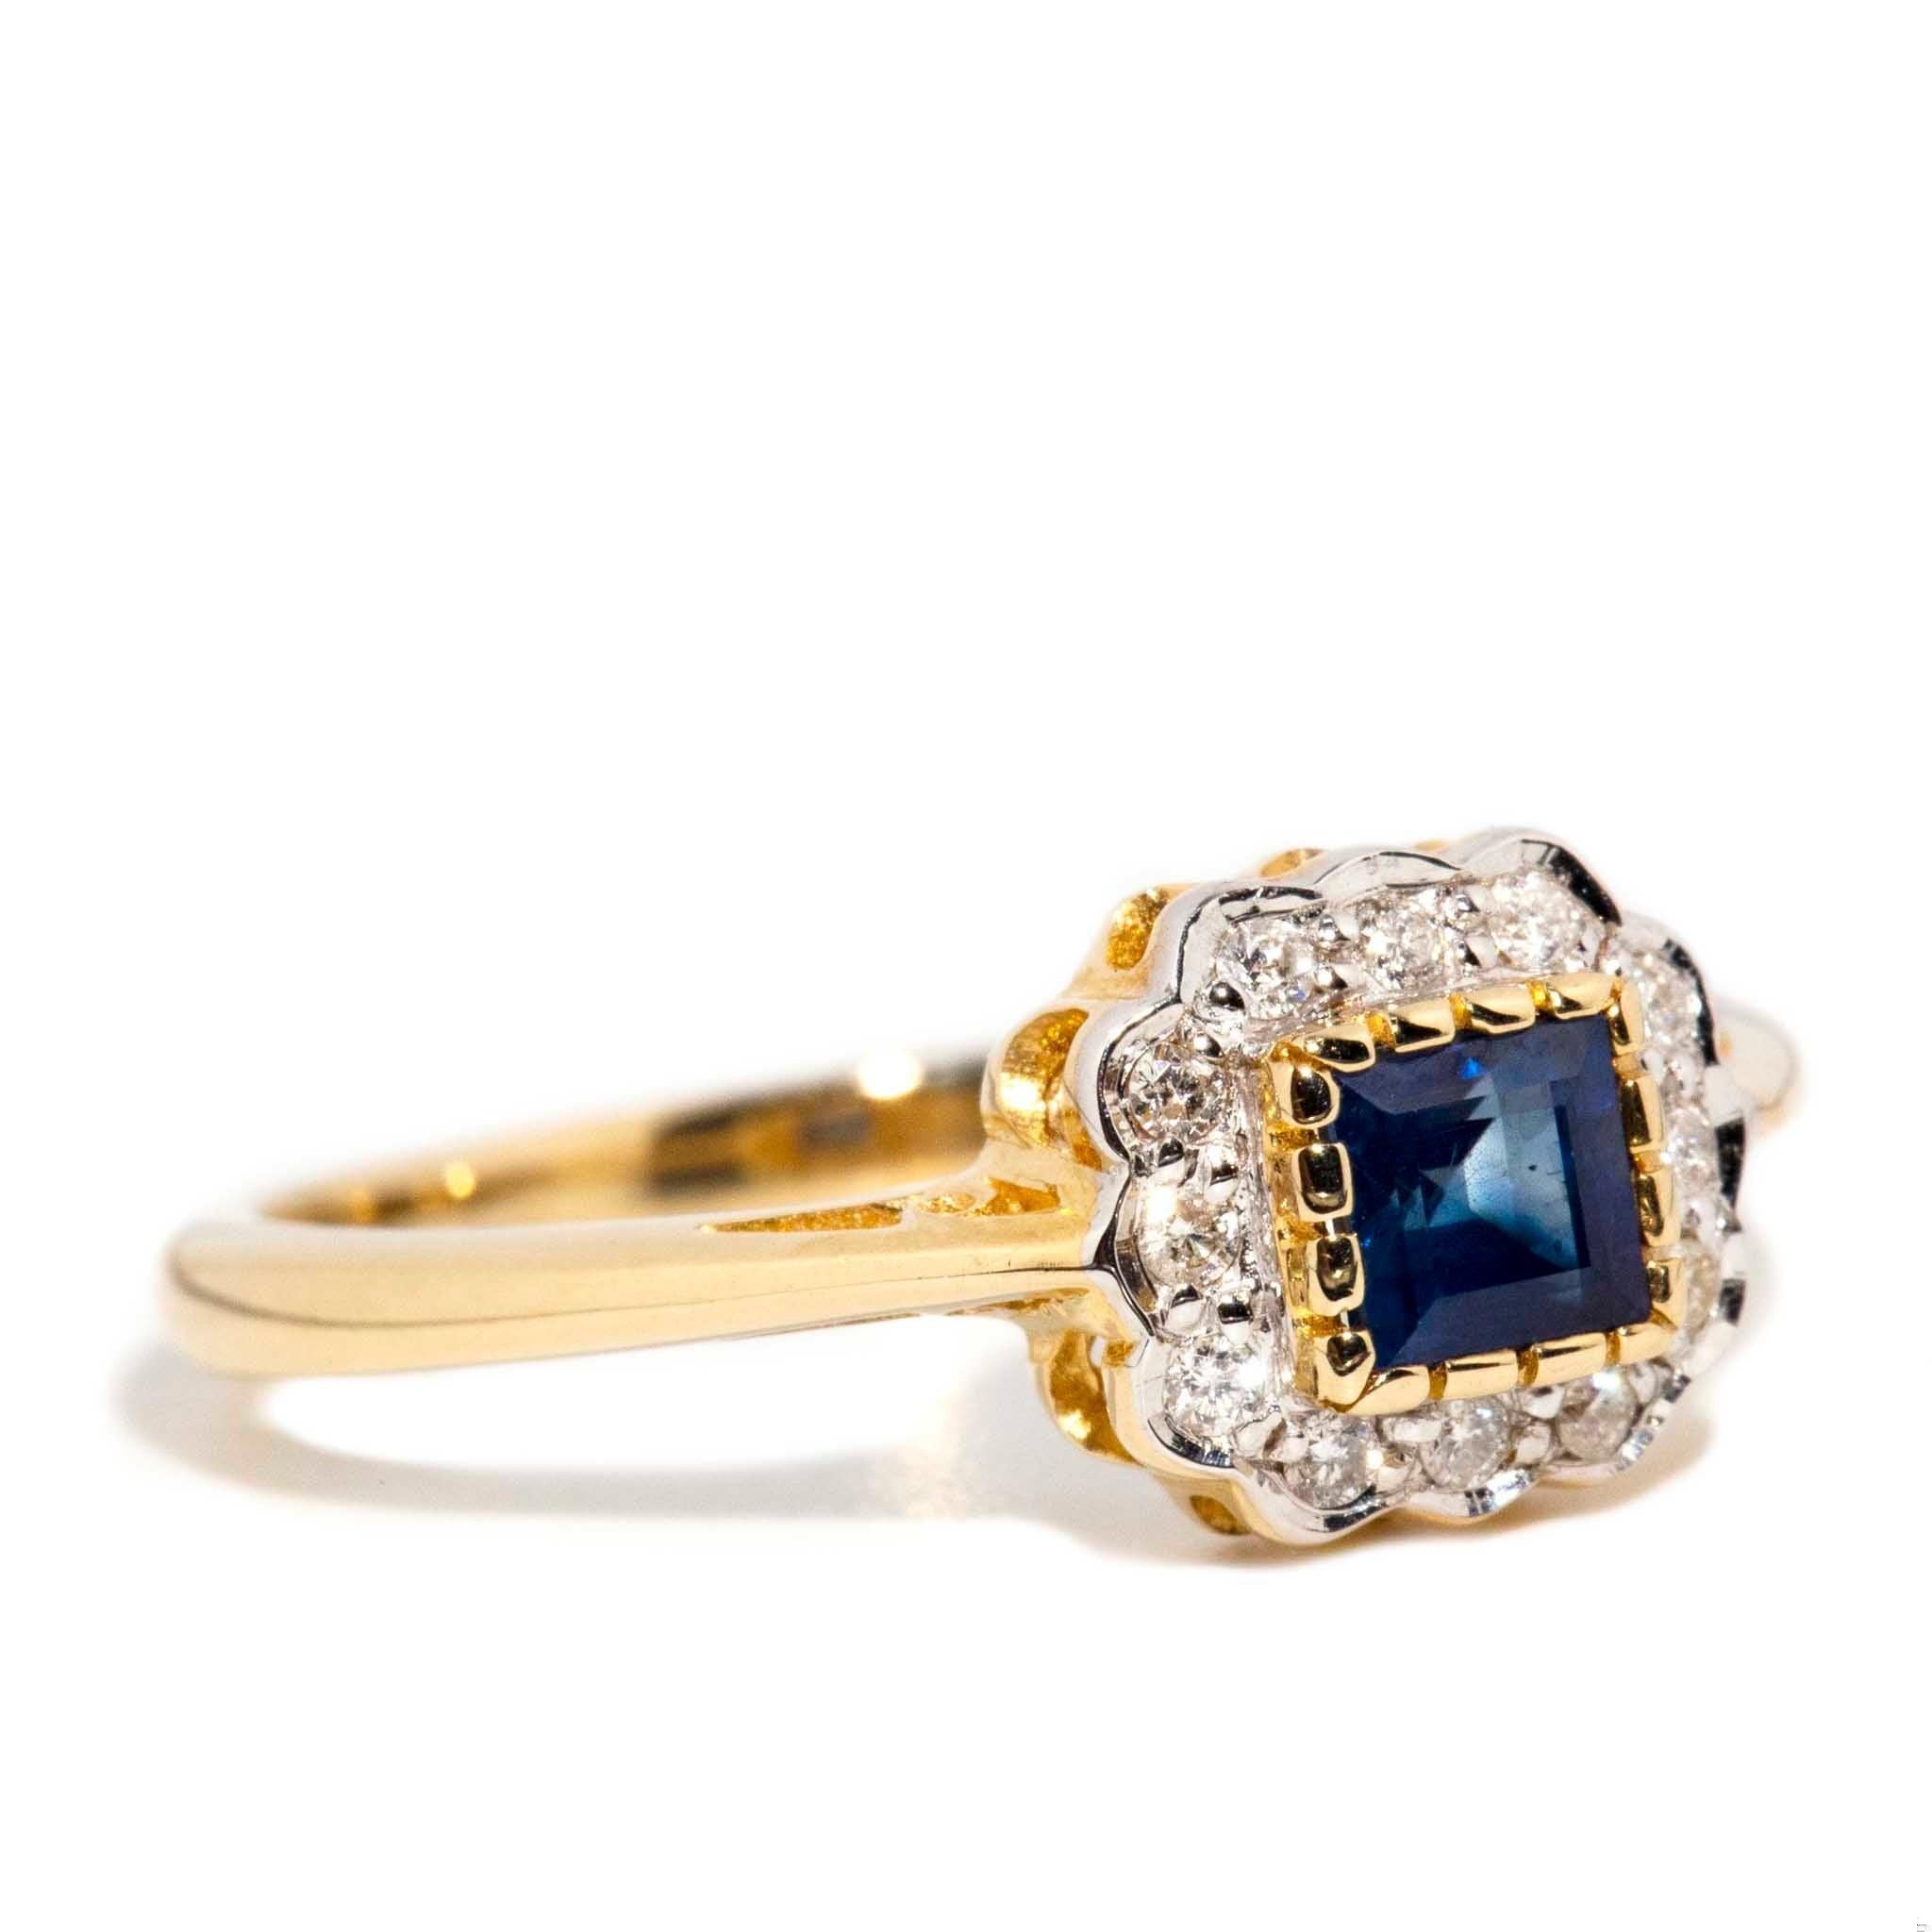 The 9 carat gold Eloise Ring is a delicate reimagining of a vintage flower. Her radiant blue sapphire, surrounded by a halo of sparkling diamonds is a sweet gift for that someone special. Inspired by the romance of the silver screen she is looking